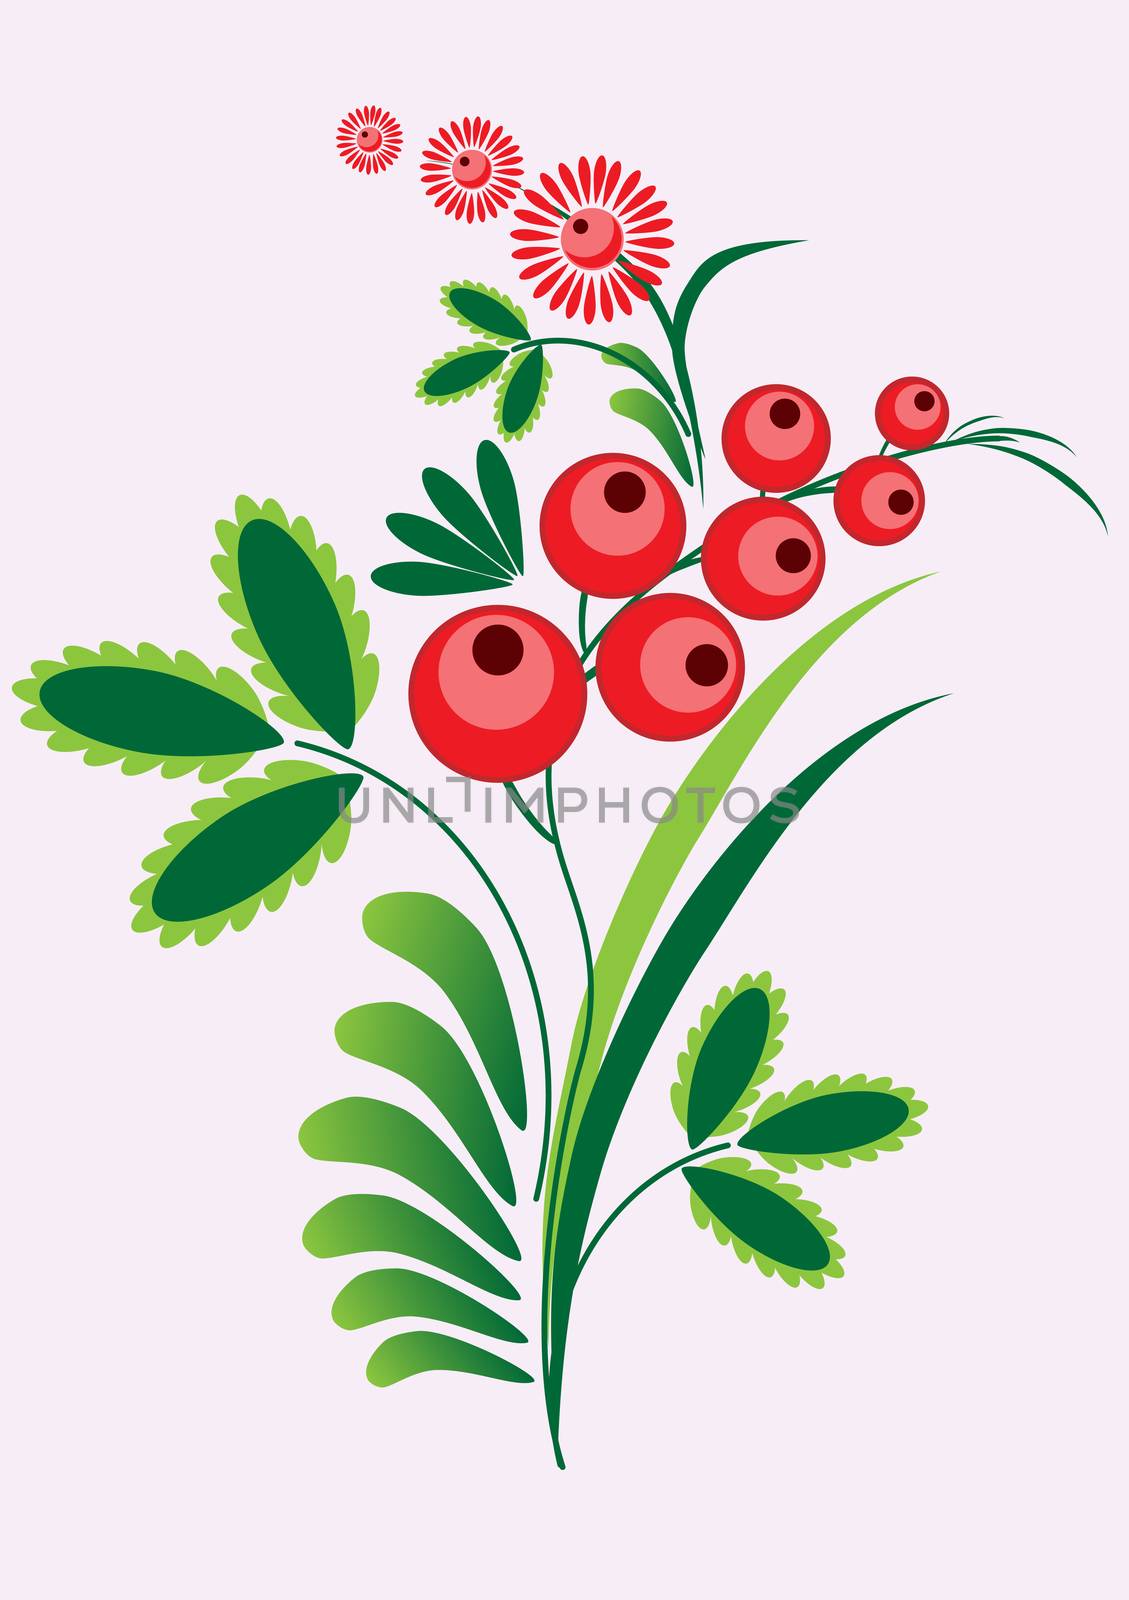 Rowan berries branch with berrie and leaves on white background. by Adamchuk